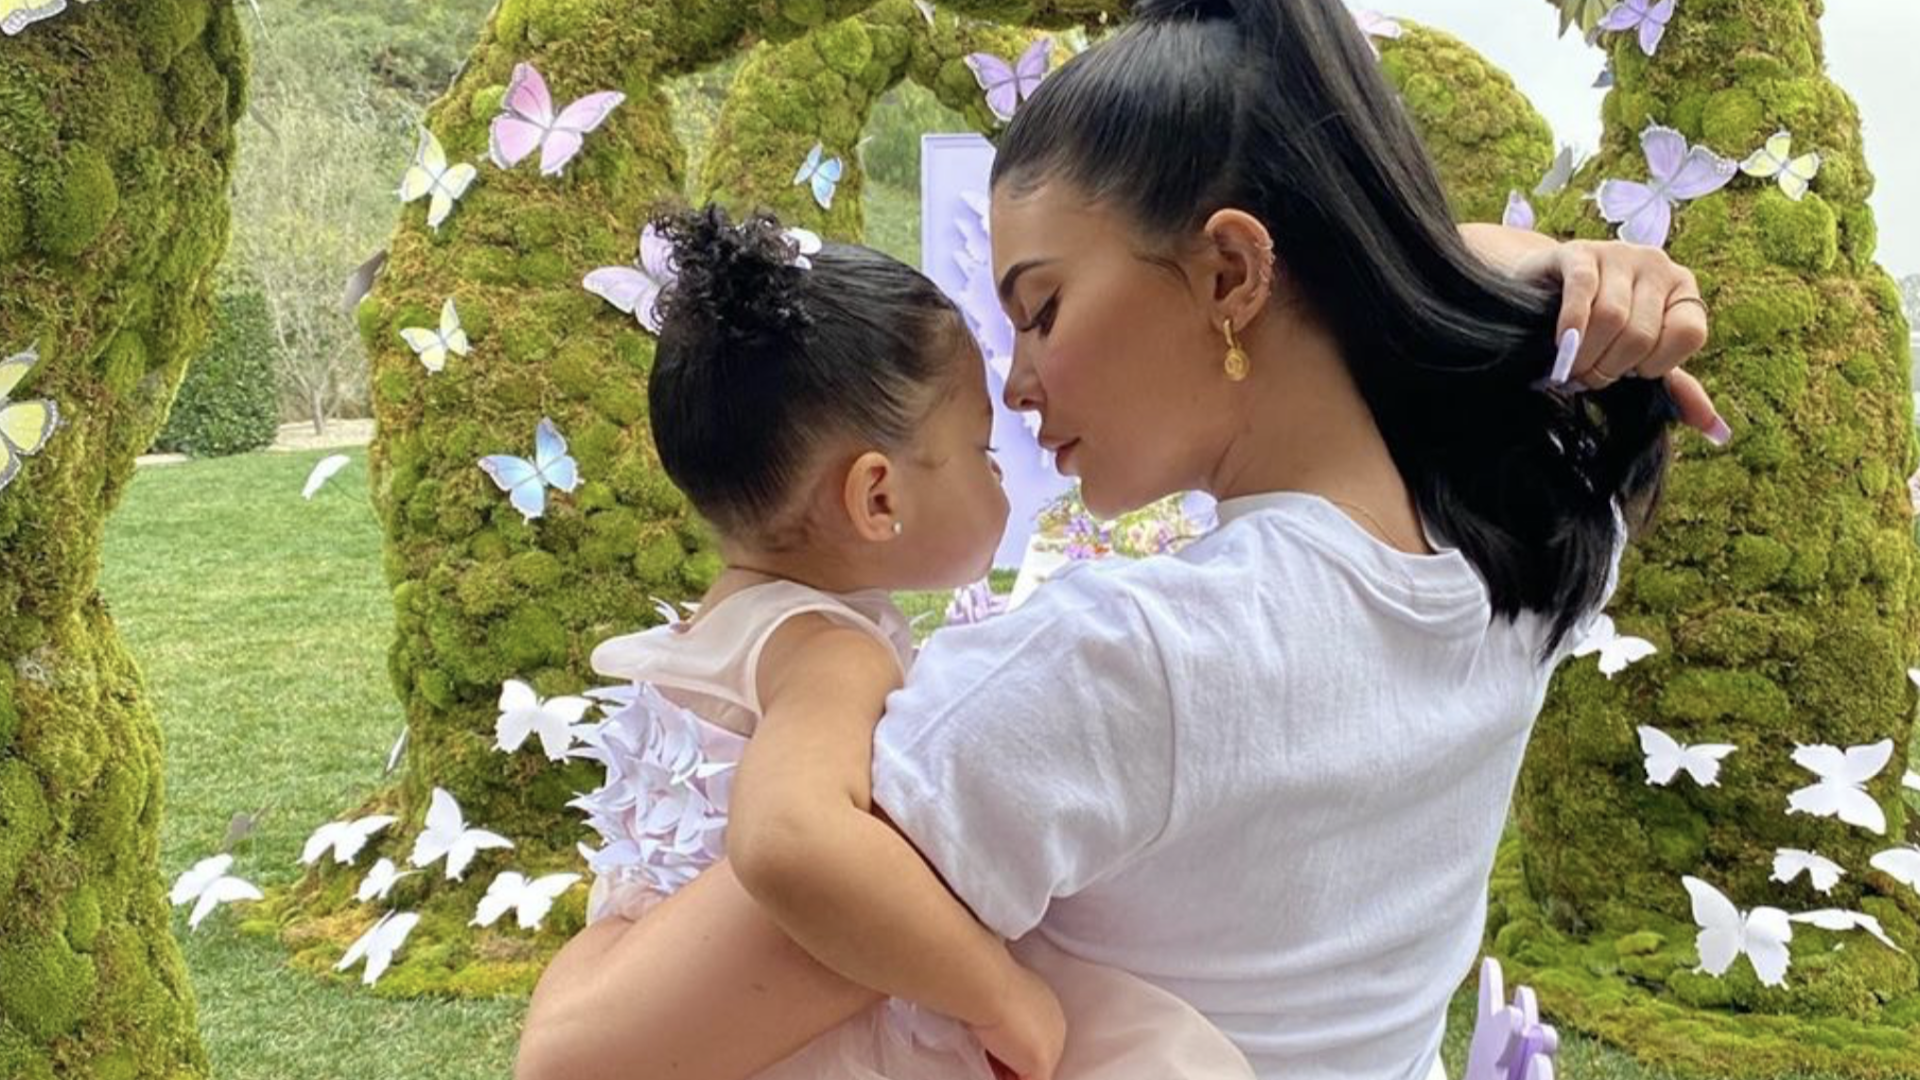 Kylie and her daughter